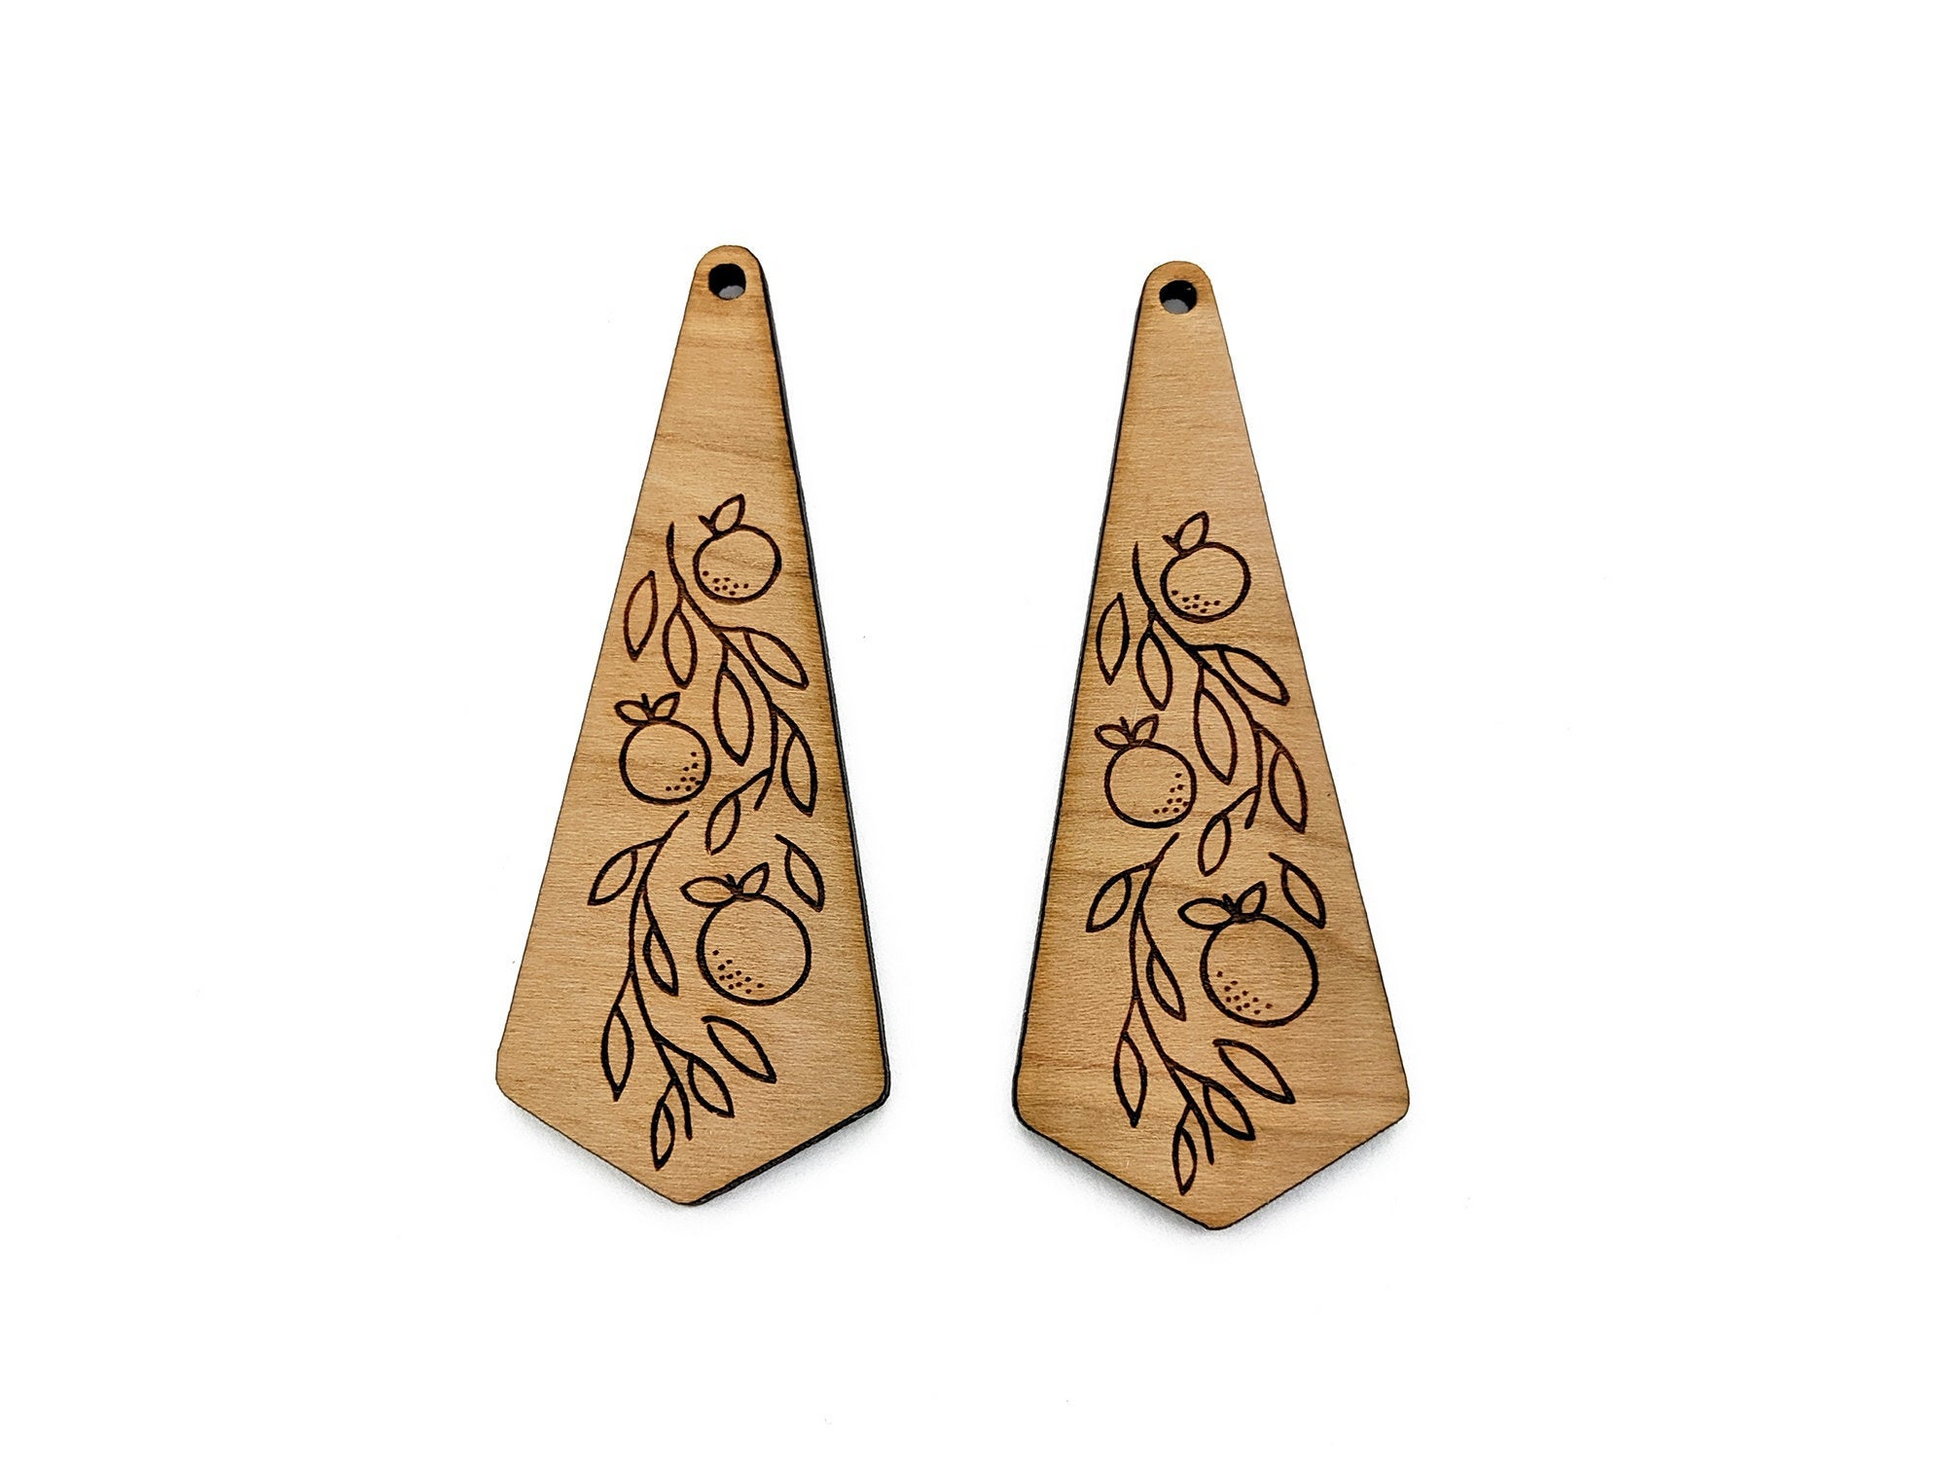 a pair of wooden earrings with fruit engraved on them